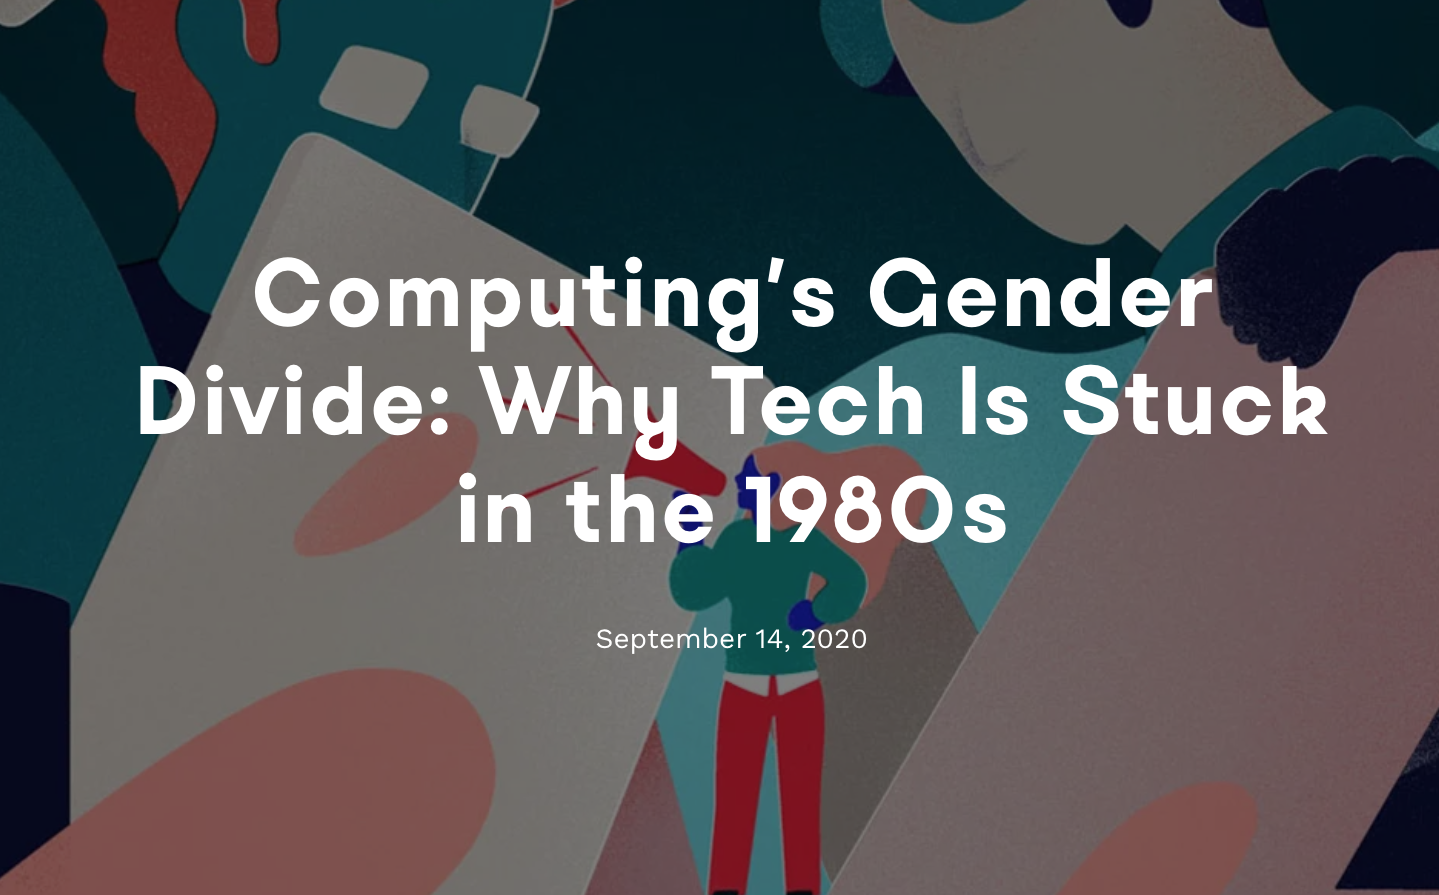 Read about gender in computing